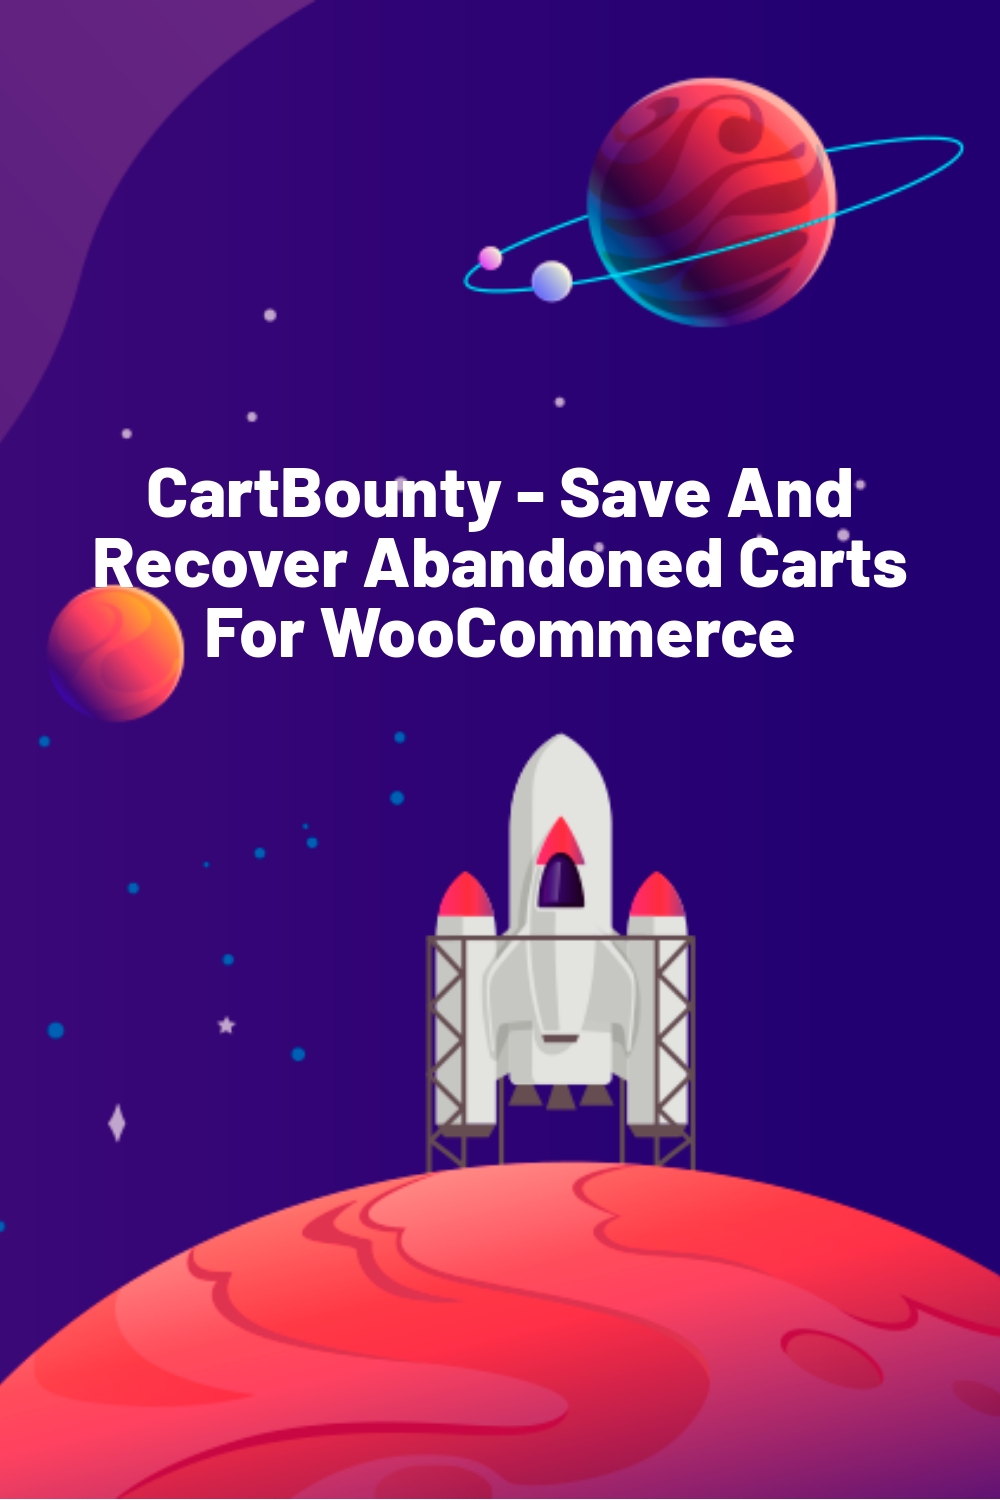 CartBounty – Save And Recover Abandoned Carts For WooCommerce